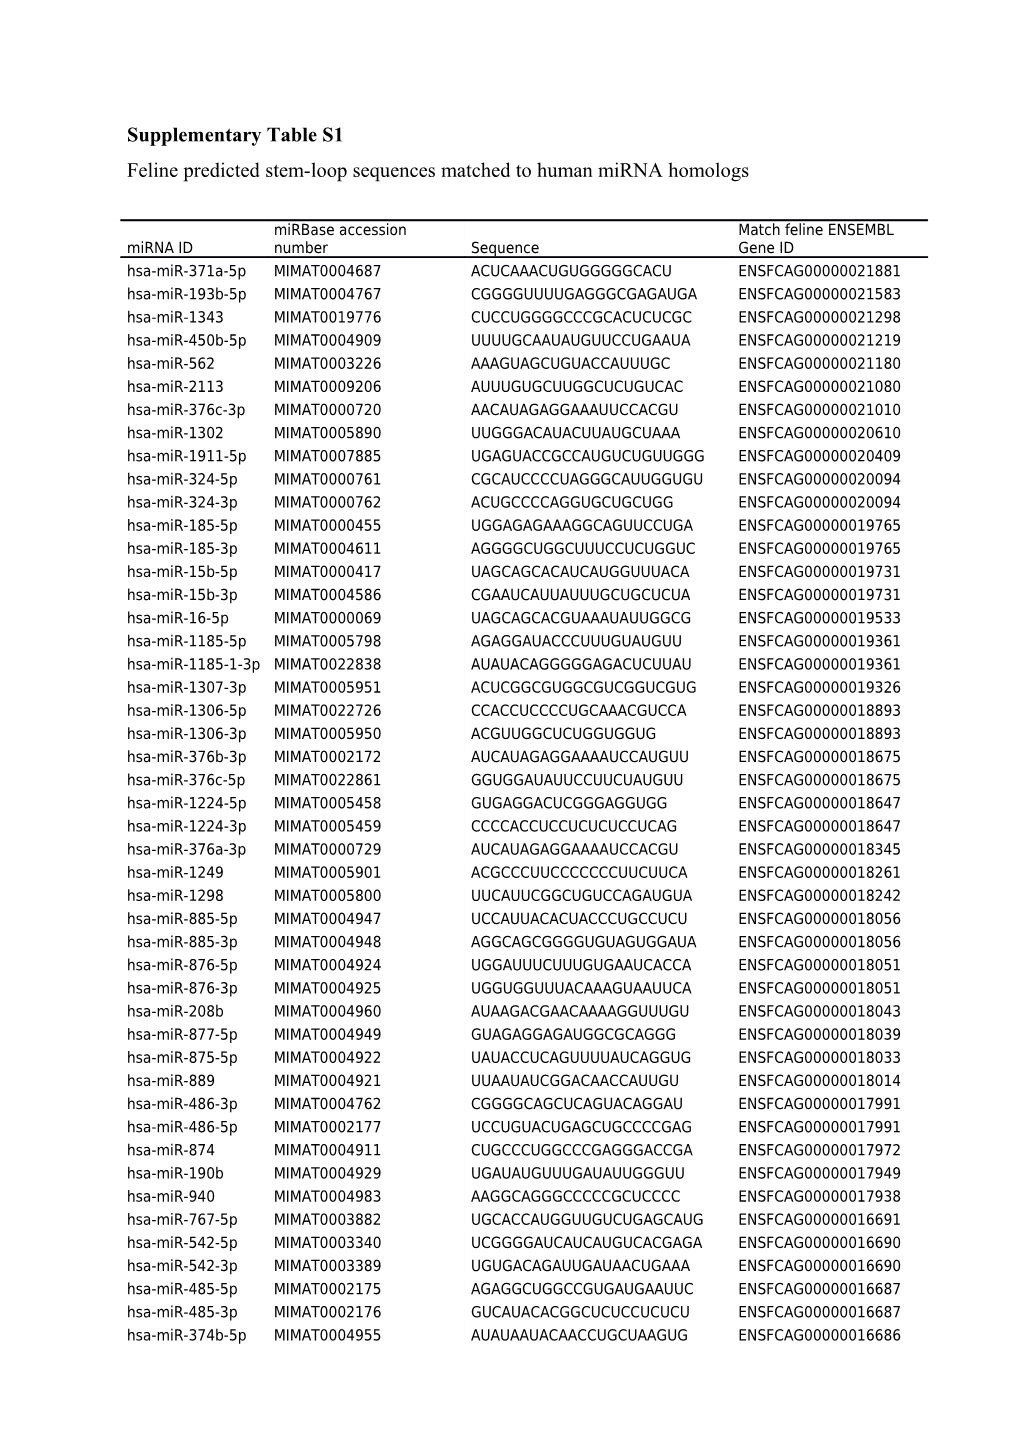 This Table Shows Predicted Feline Stem-Loop Sequences with Their ENSEMBL Gene ID and The